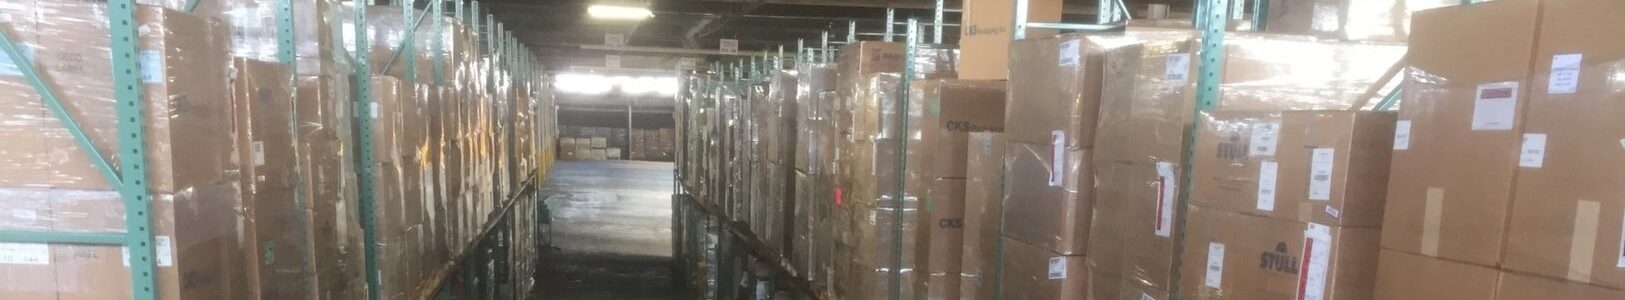 Public warehouse shelves filled with boxes in albany ny.